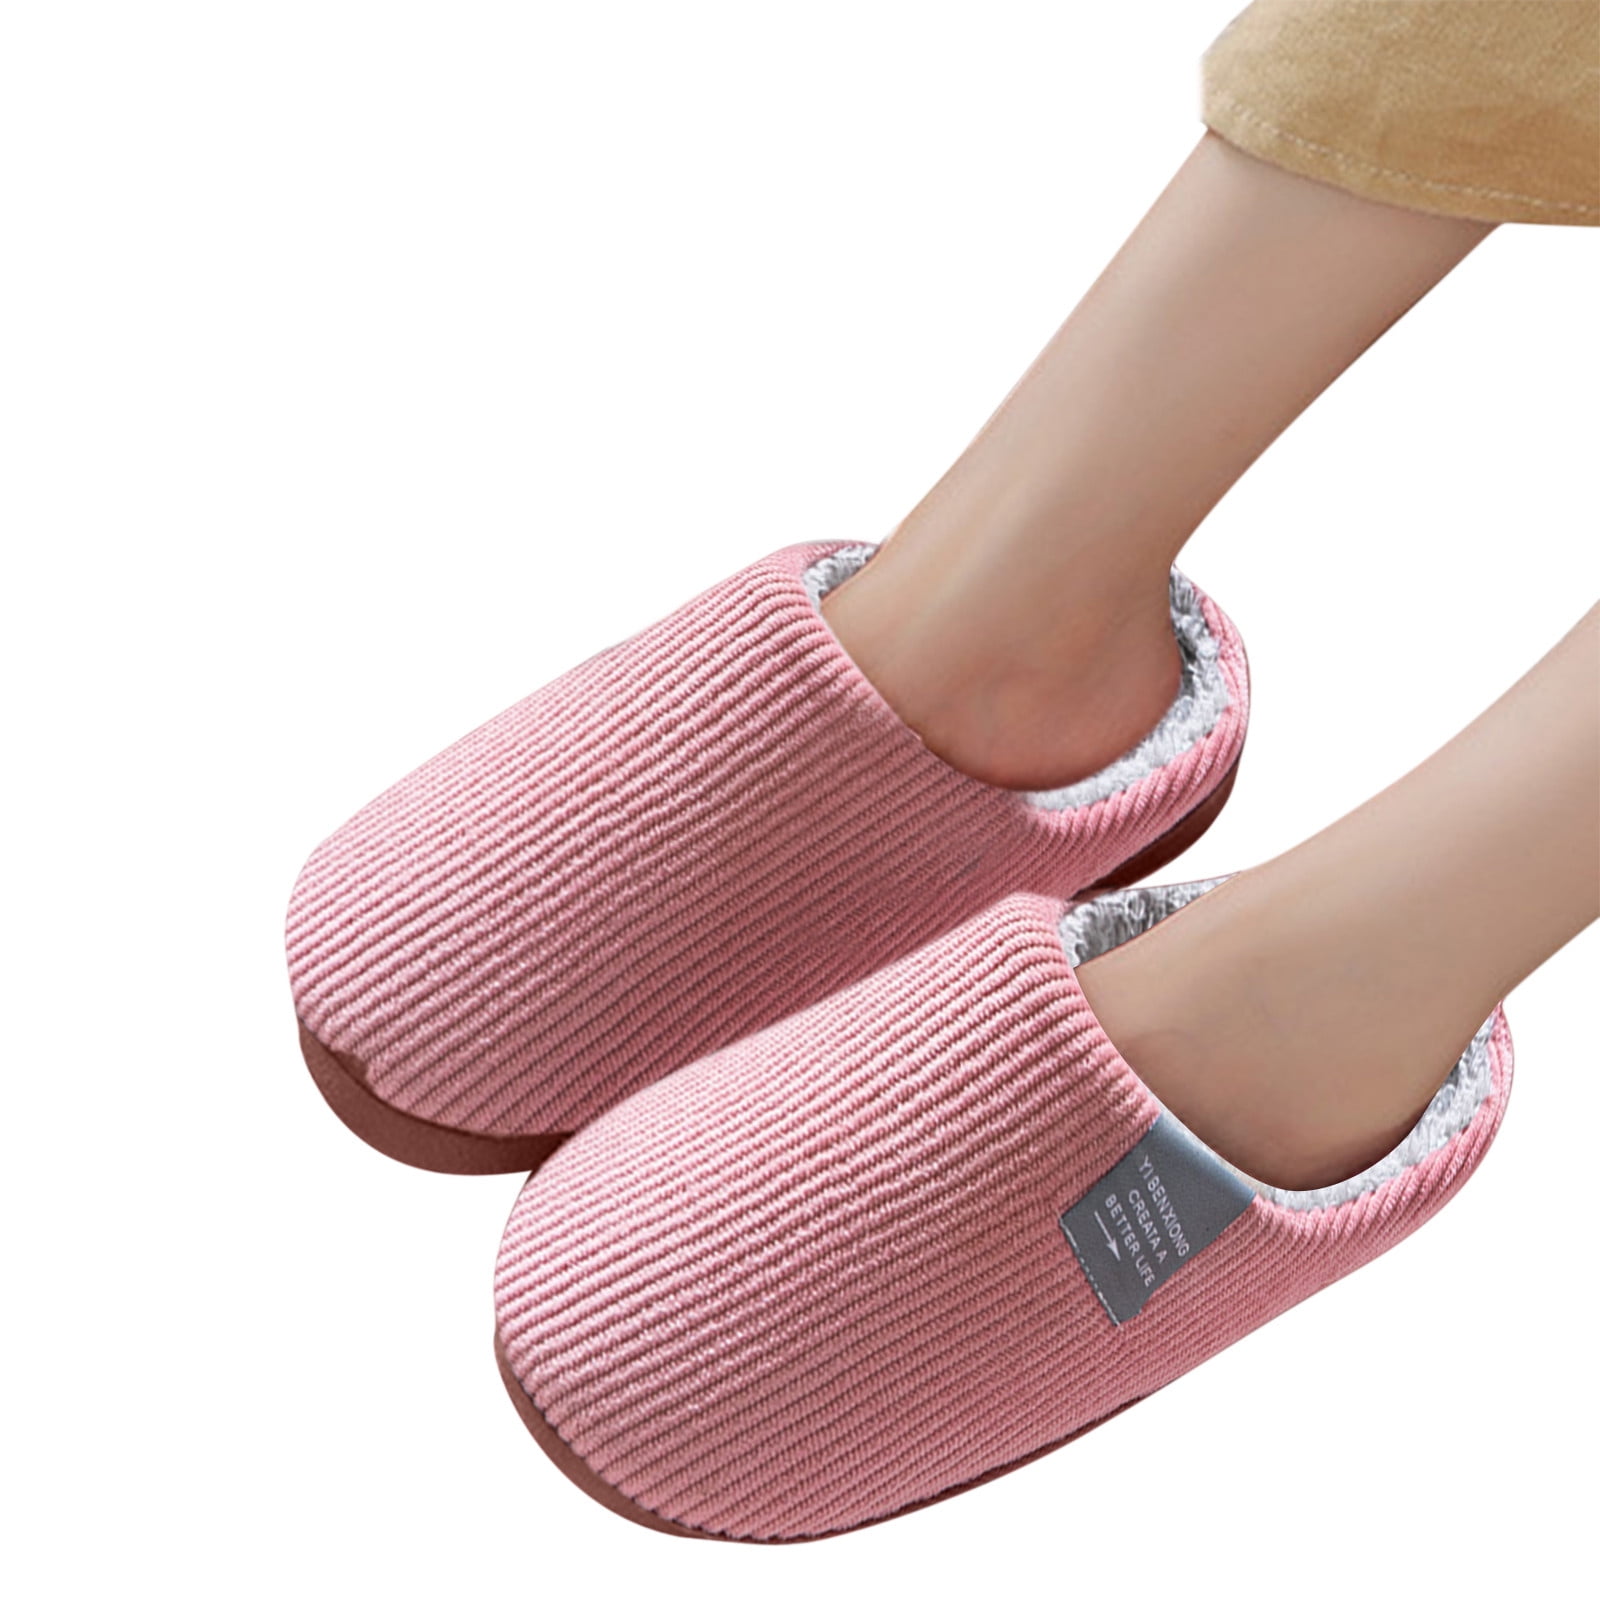 Class slippers: the best house shoes